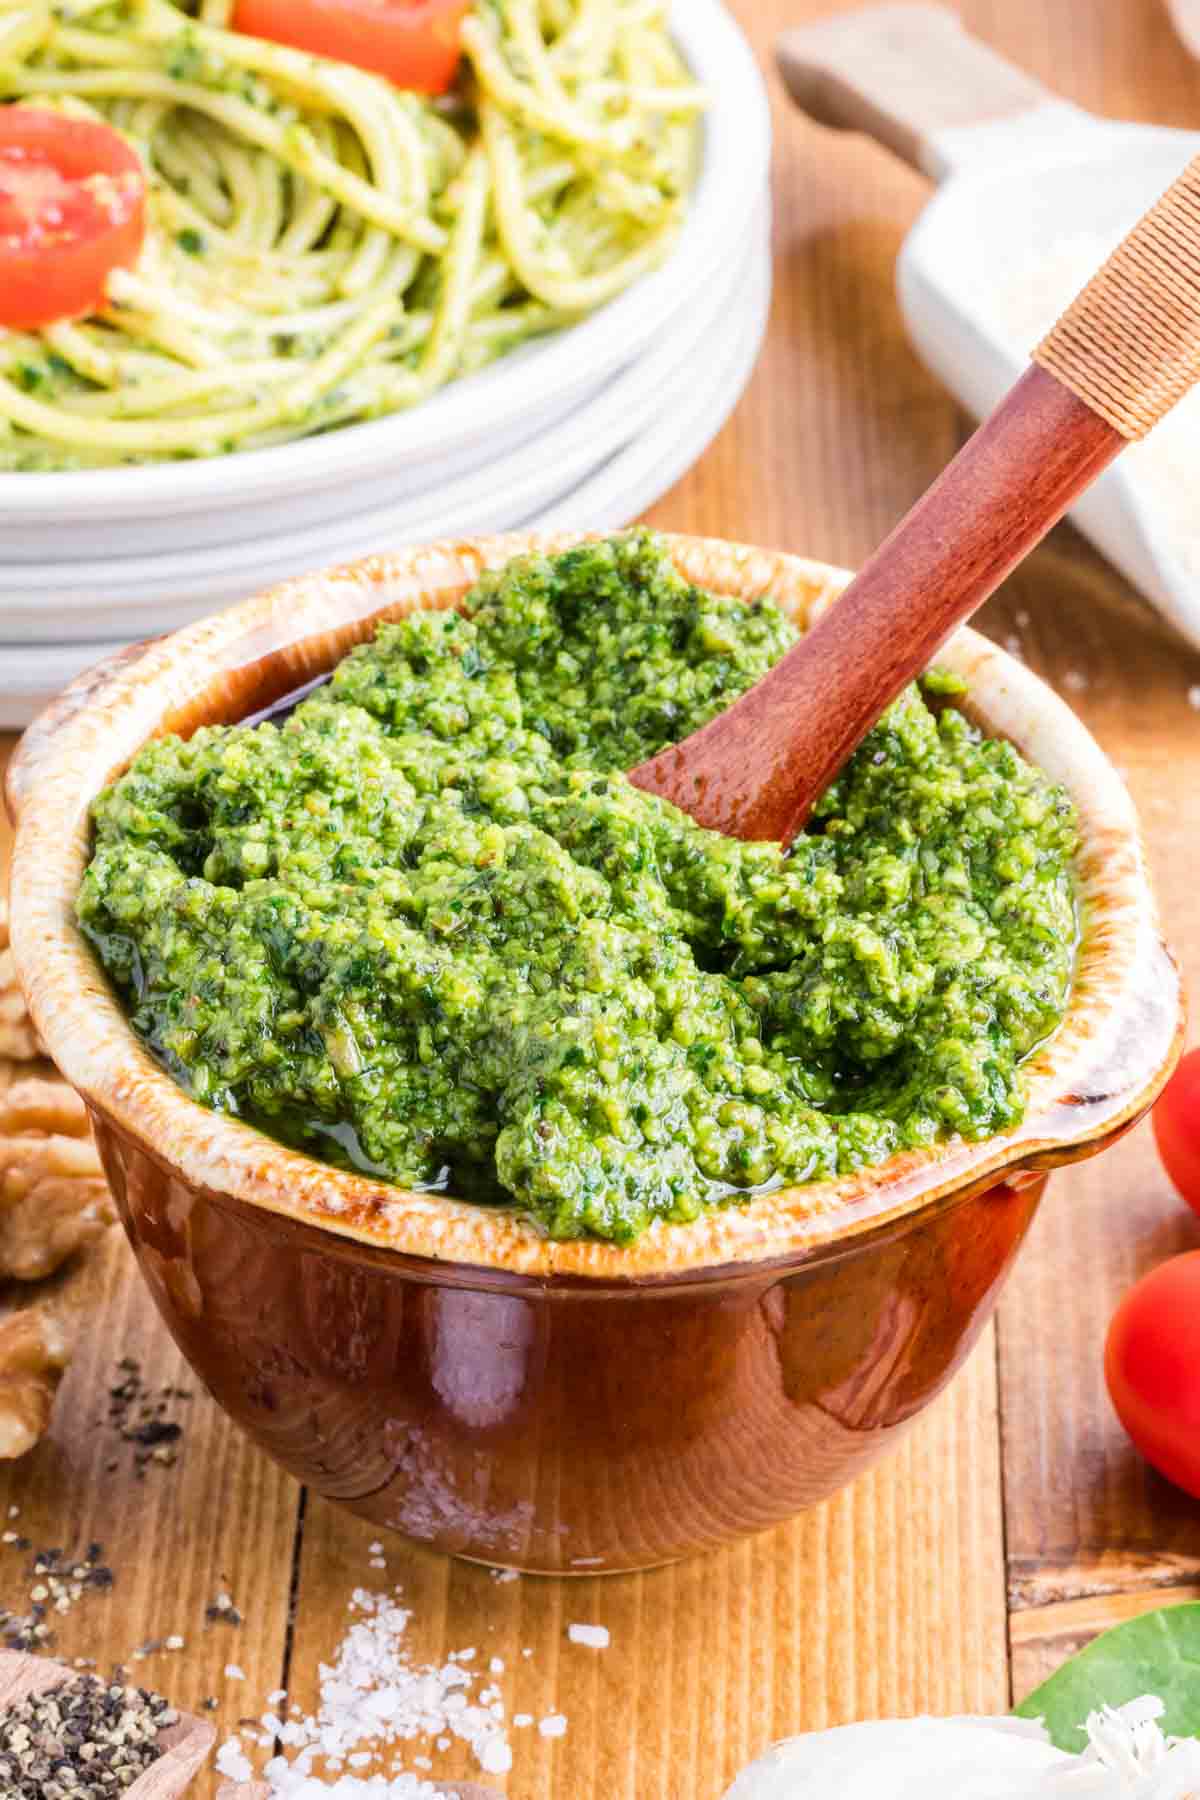 A brown bowl filled with homemade pesto sauce.